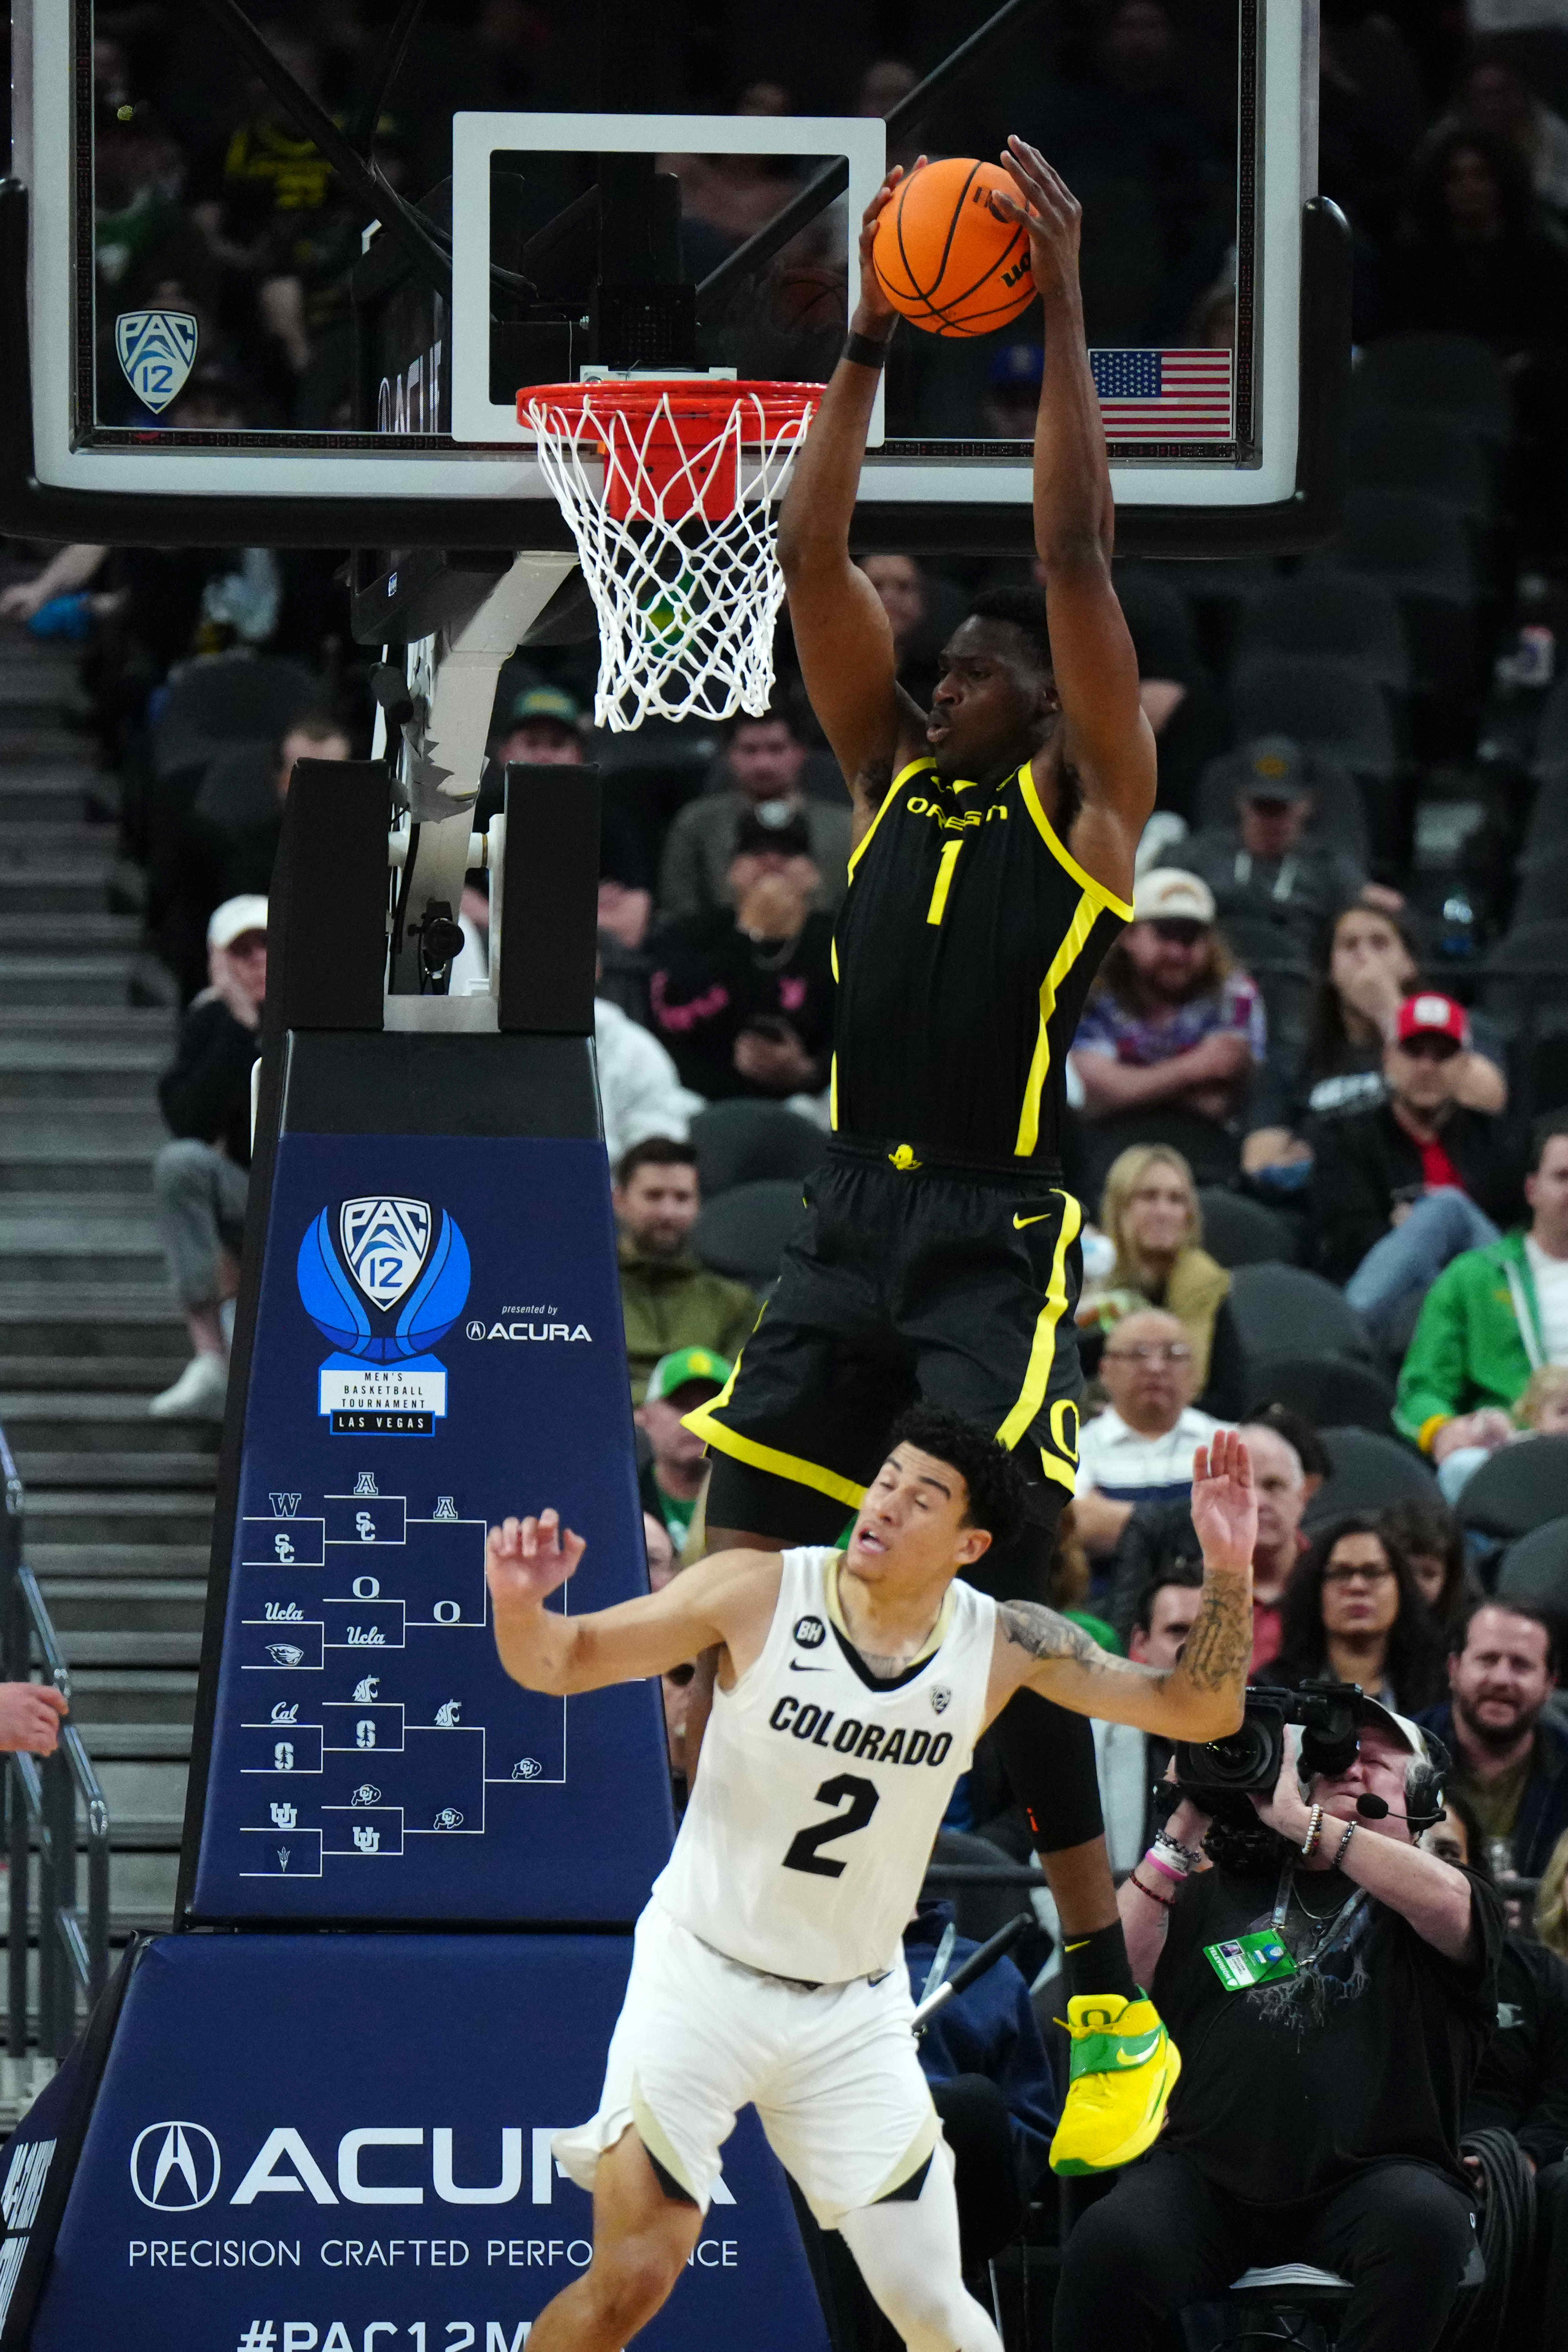 Oregon Ducks center N'Faly flies over a Colorado Buffaloes defender for a dunk in the 2024 Pac-12 Tournament.